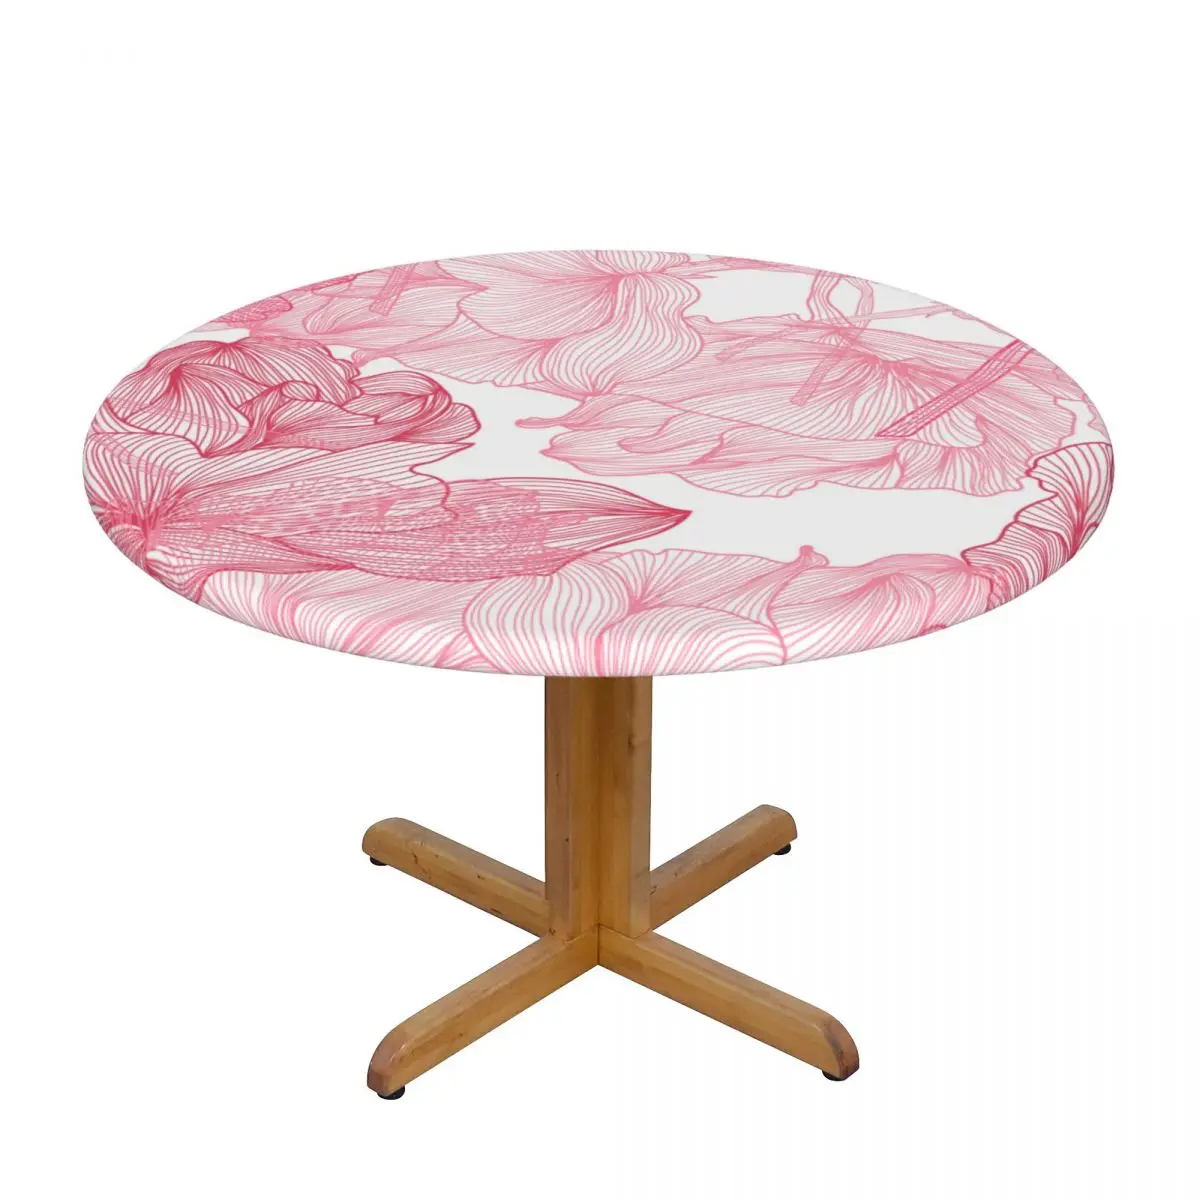 

1Pc Waterproof Tablecloths Round Elastic Tablecloth Pink Roses Table Cloth Cover Coffee Table Pad